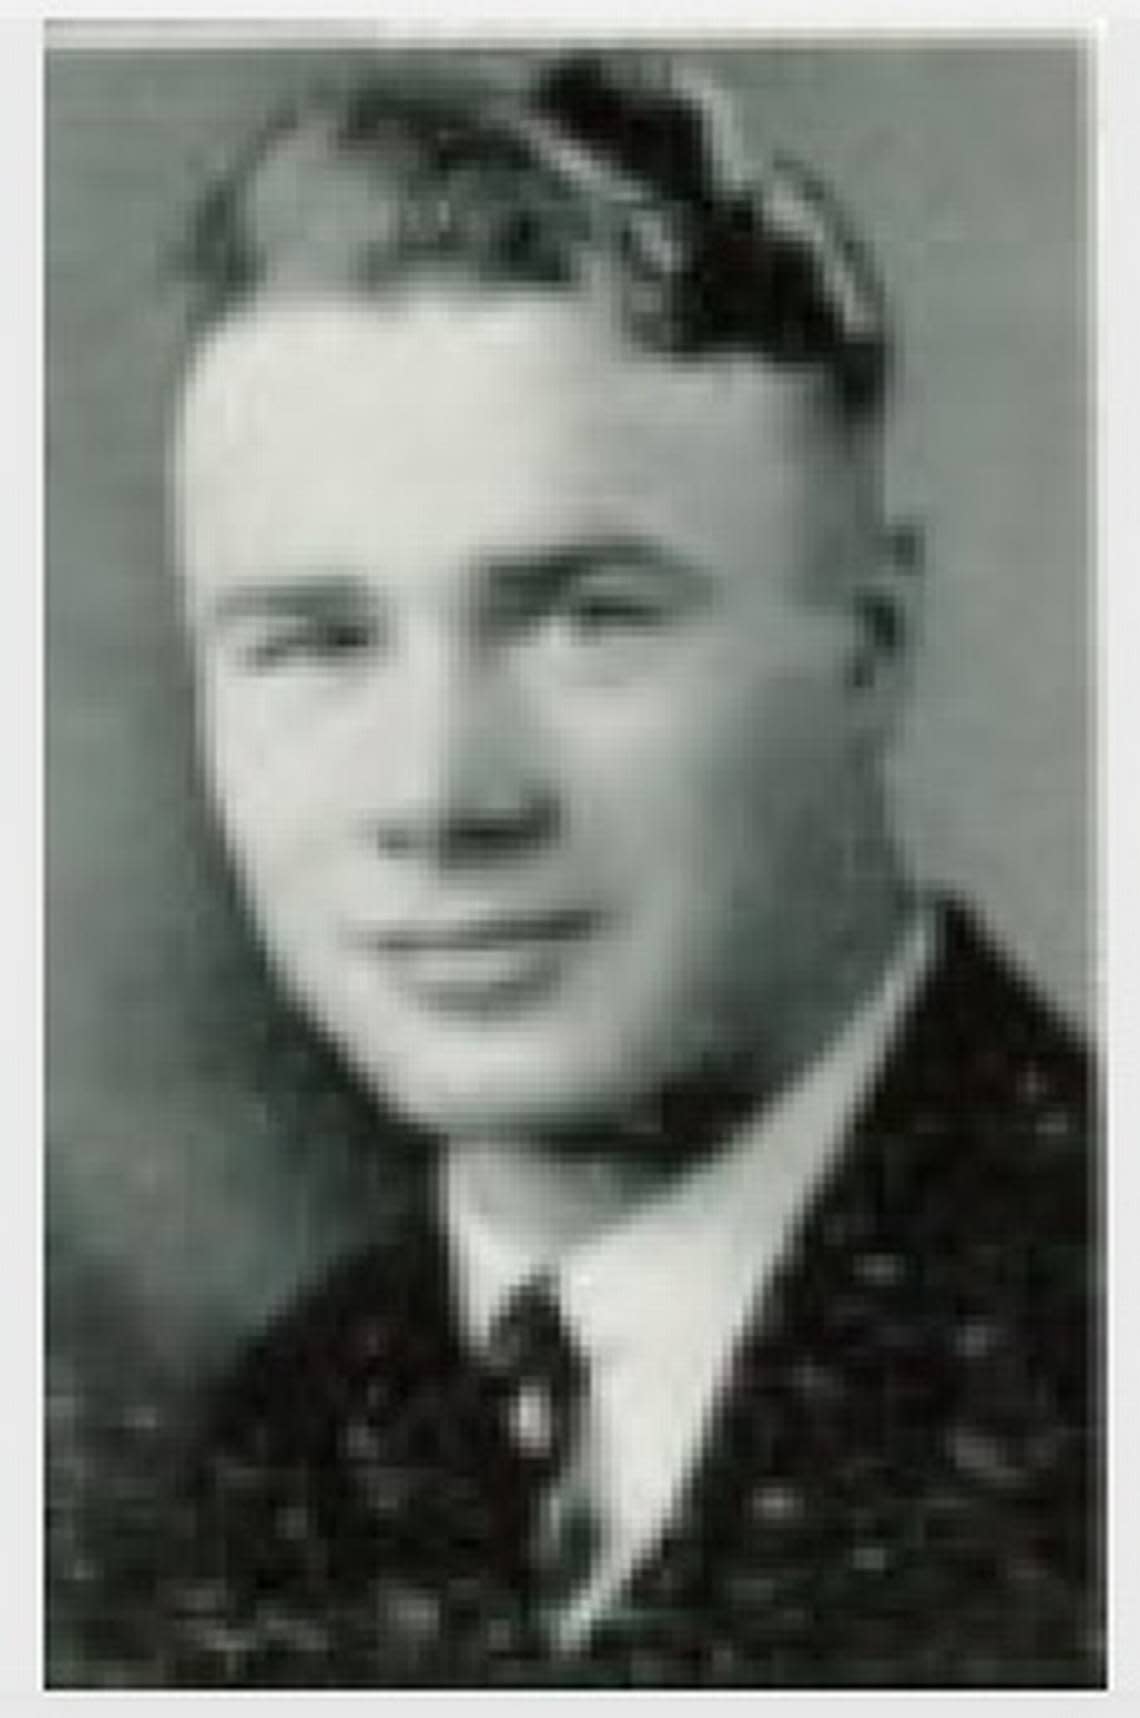 Lorentz Hultgren of Tacoma died on the USS Oklahoma during the attack on Pearl Harbor on Dec. 7, 1941.